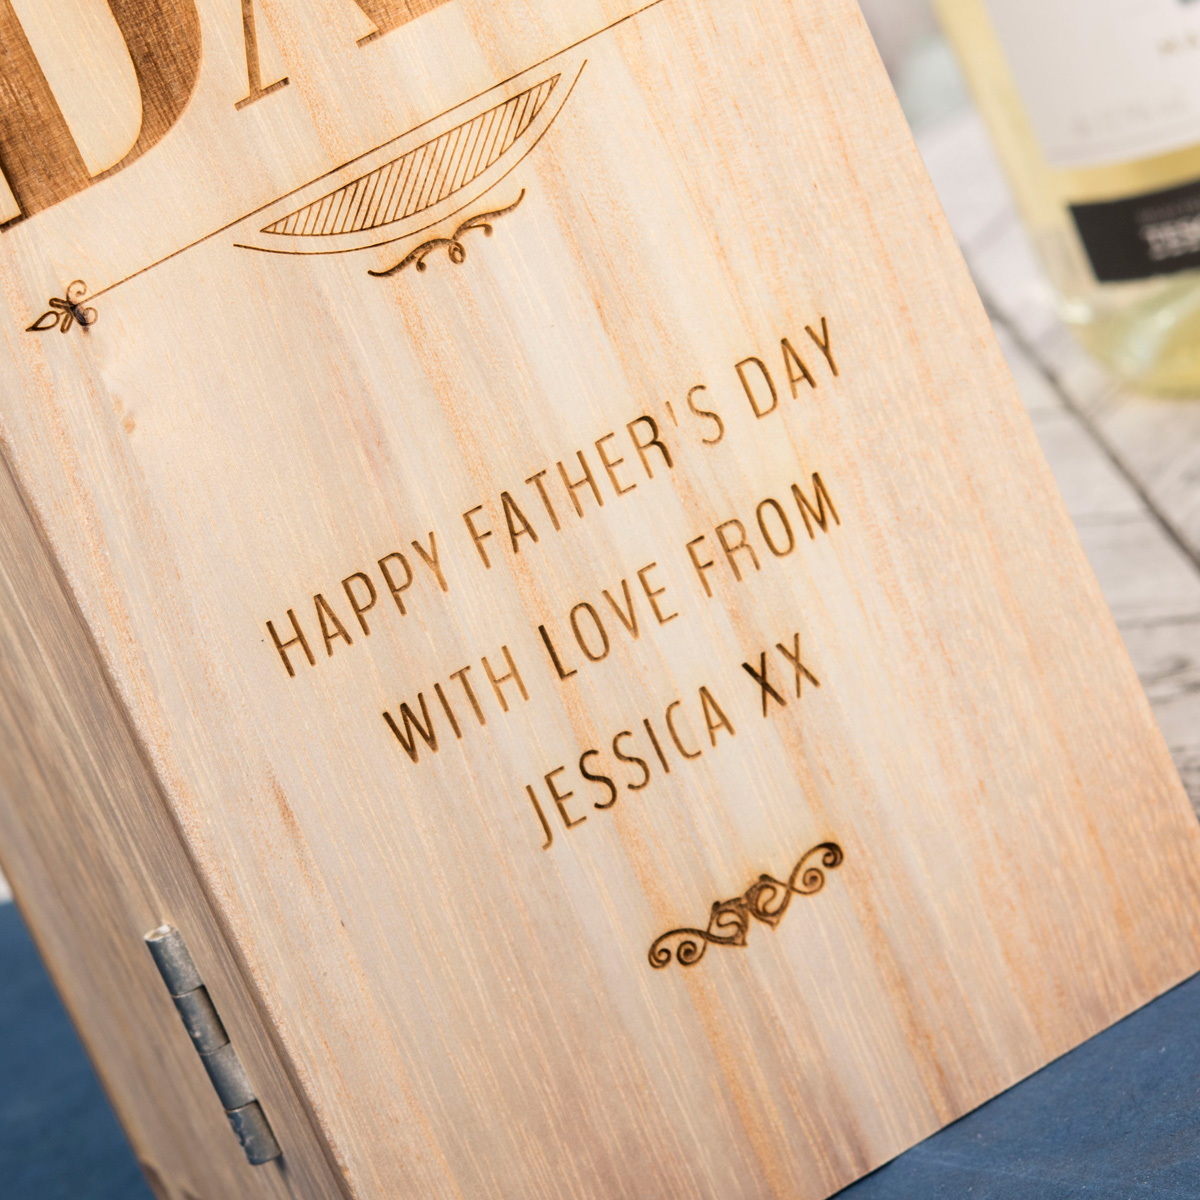 Personalised Luxury Wooden Wine Box - No1 Dad